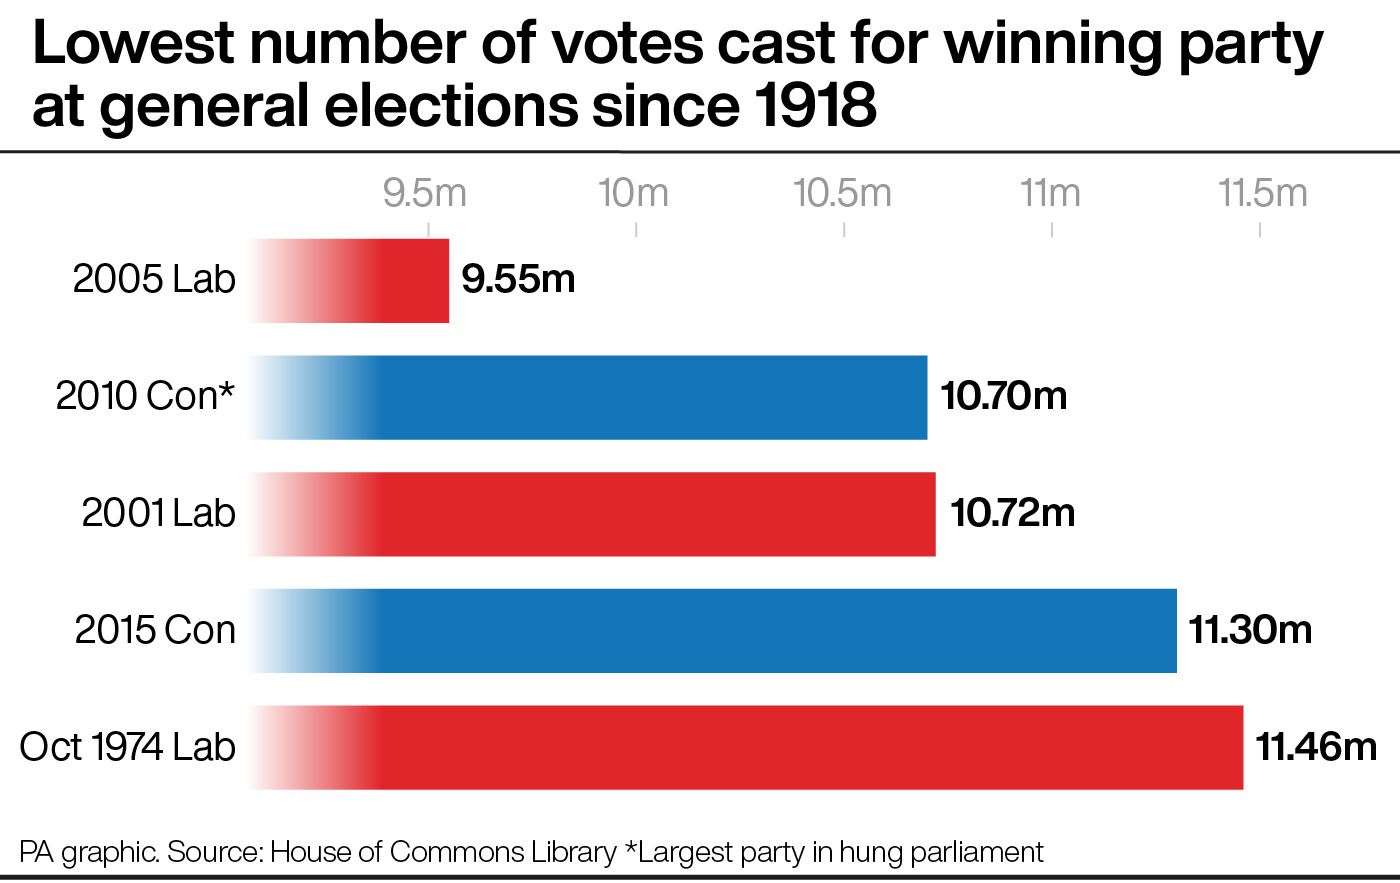 Lowest number of votes cast for winning parties at general elections since 1918 (PA Graphics)